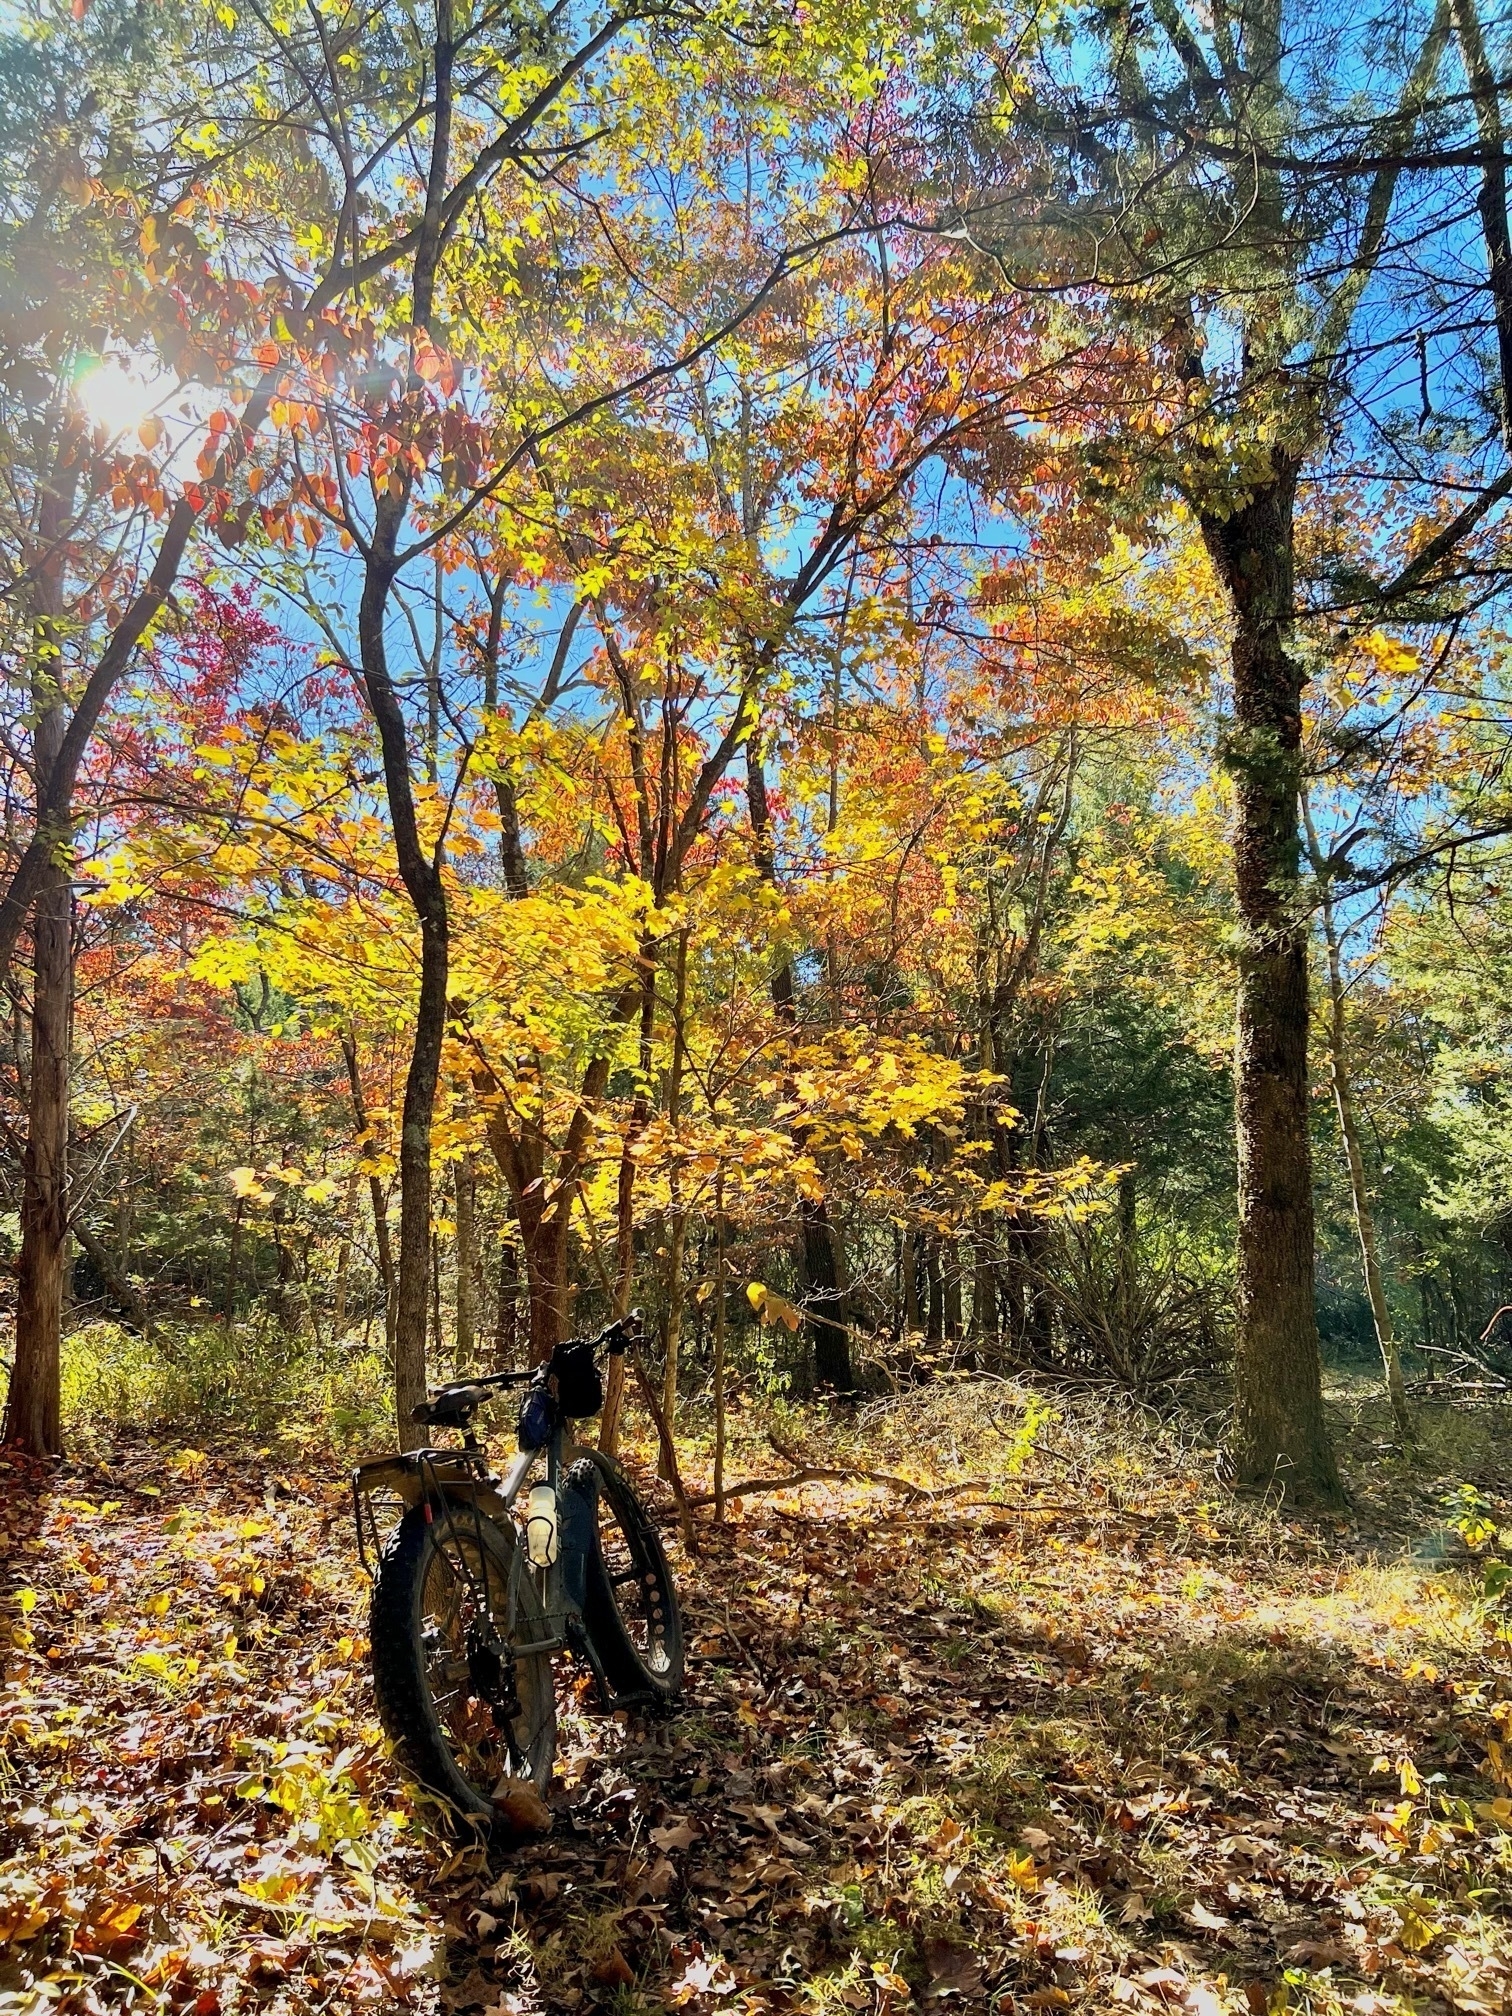 A fat tire bike leaves against a tree near a leaf-covered trail under a canopy of bright yellow, red and green leaves against a bright blue sky.